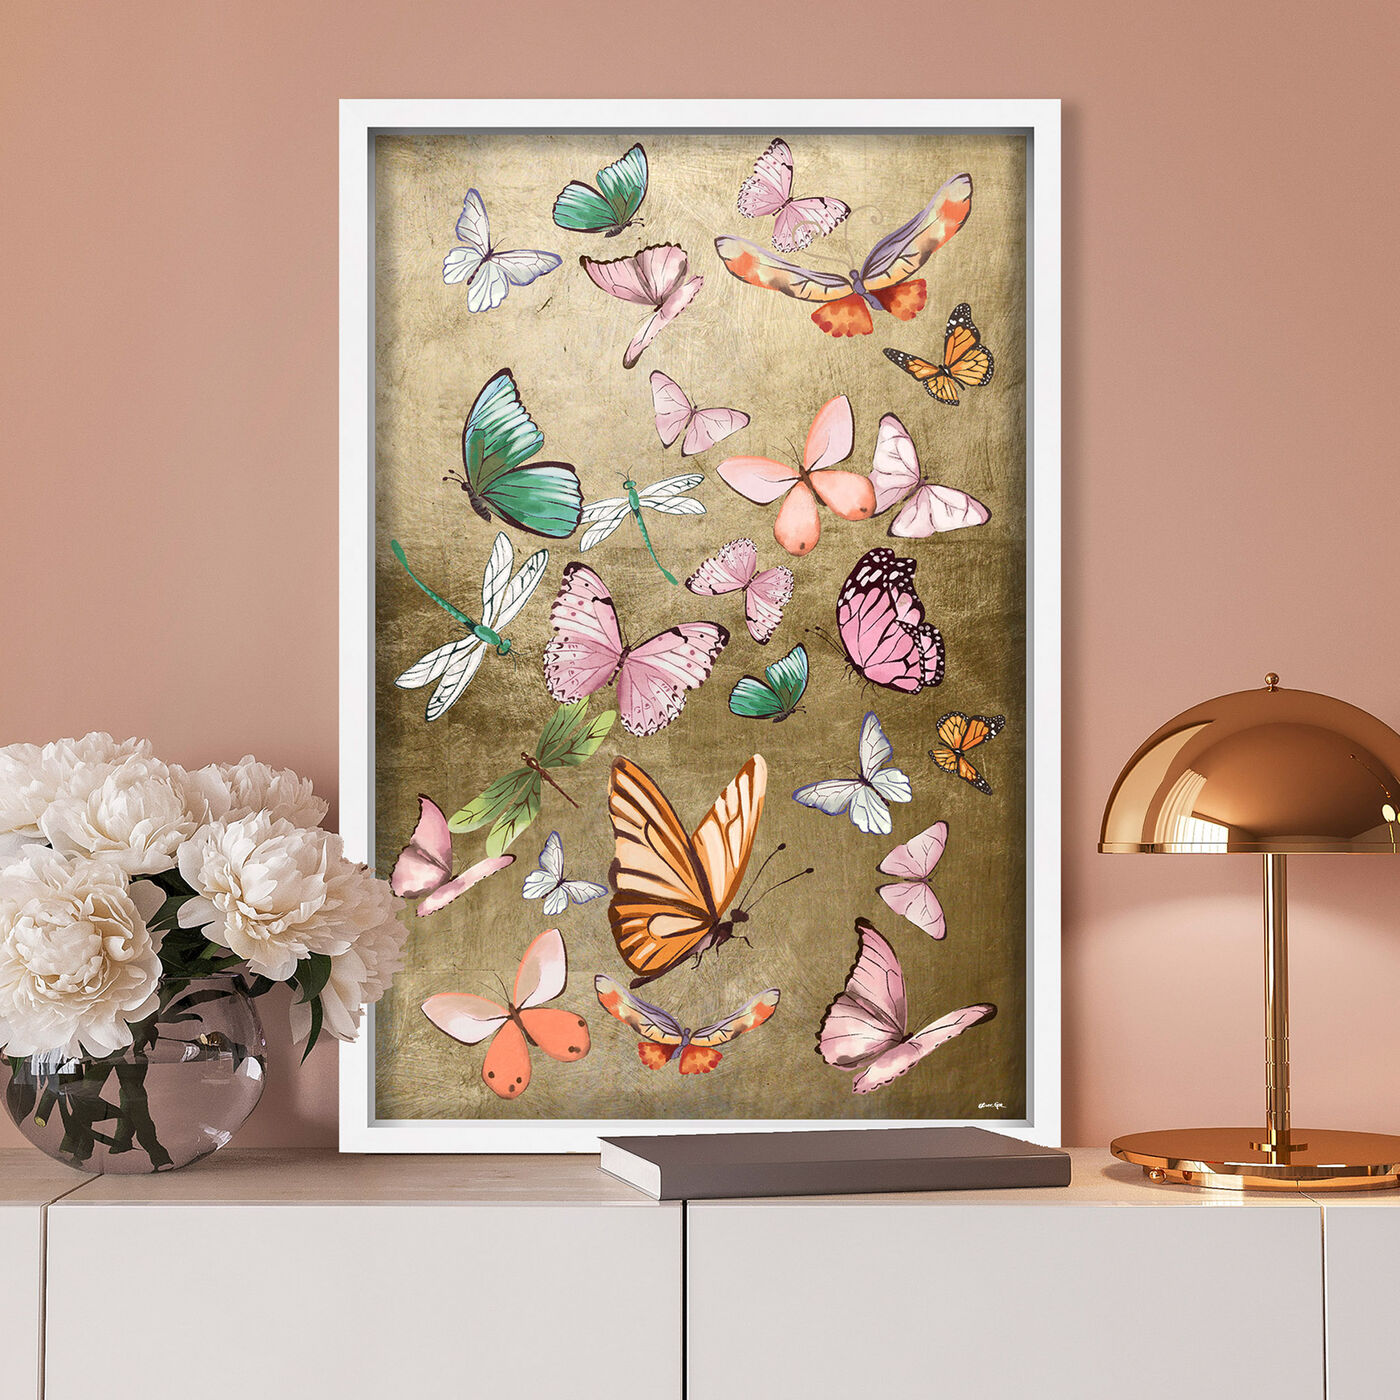 Flying Over Oliver Gold by Leaf Hand-Applied Animals Gold | Art The Gal With Wall 